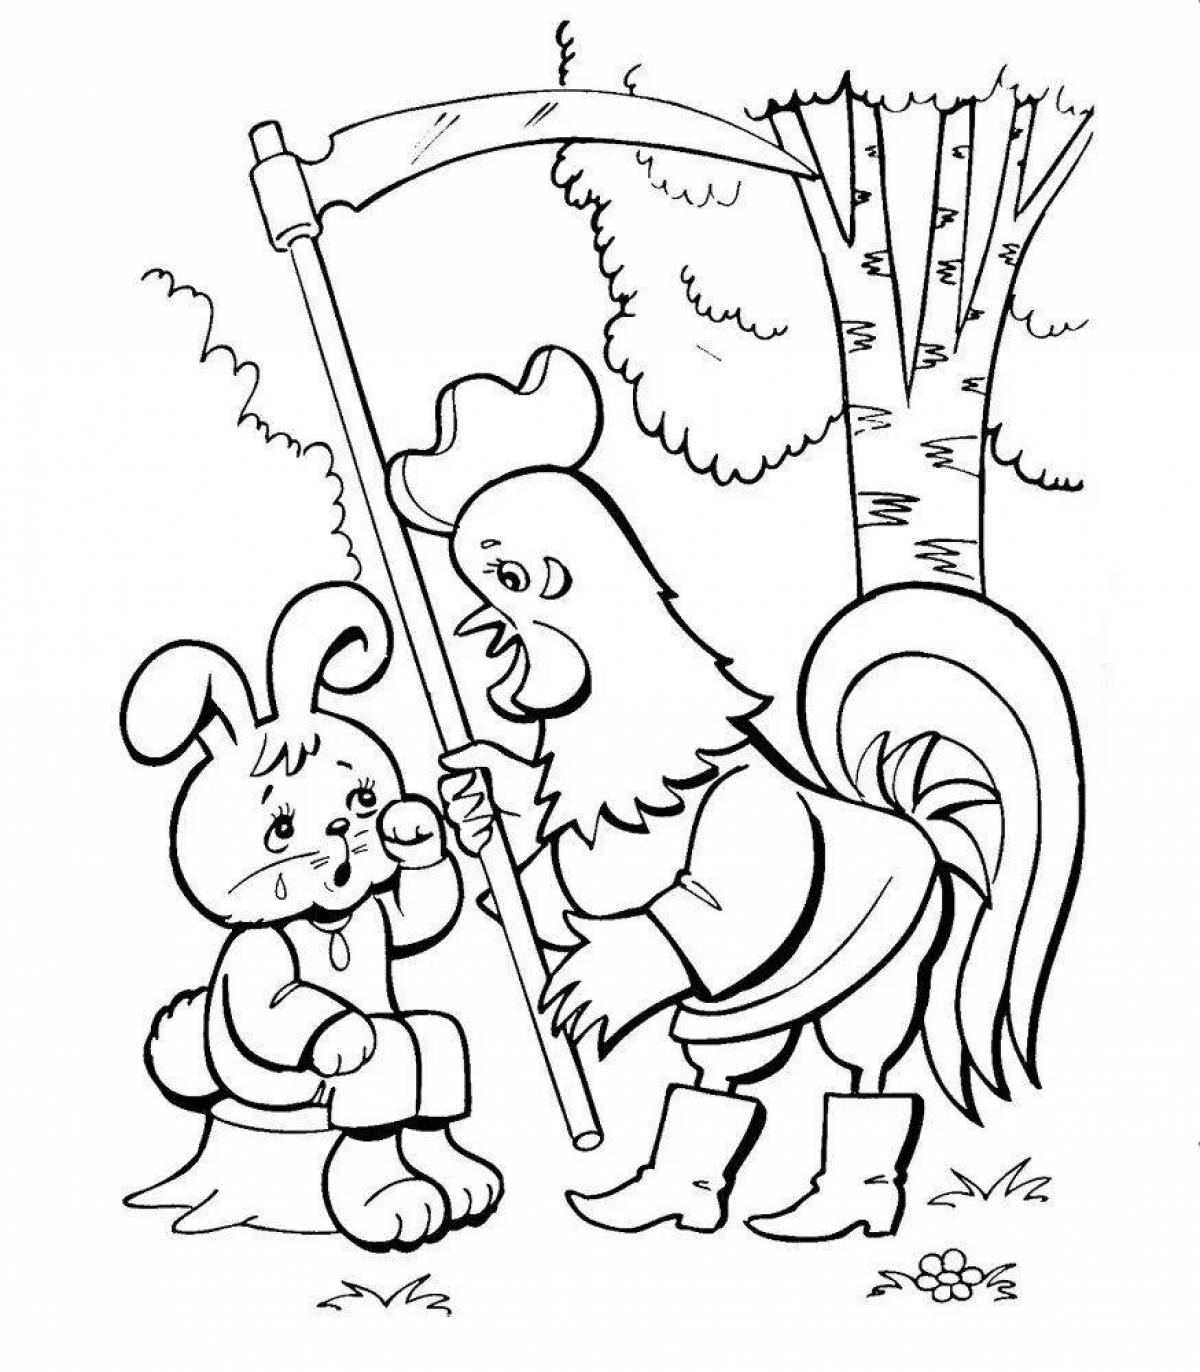 Glorious fox and hare coloring pages for kids